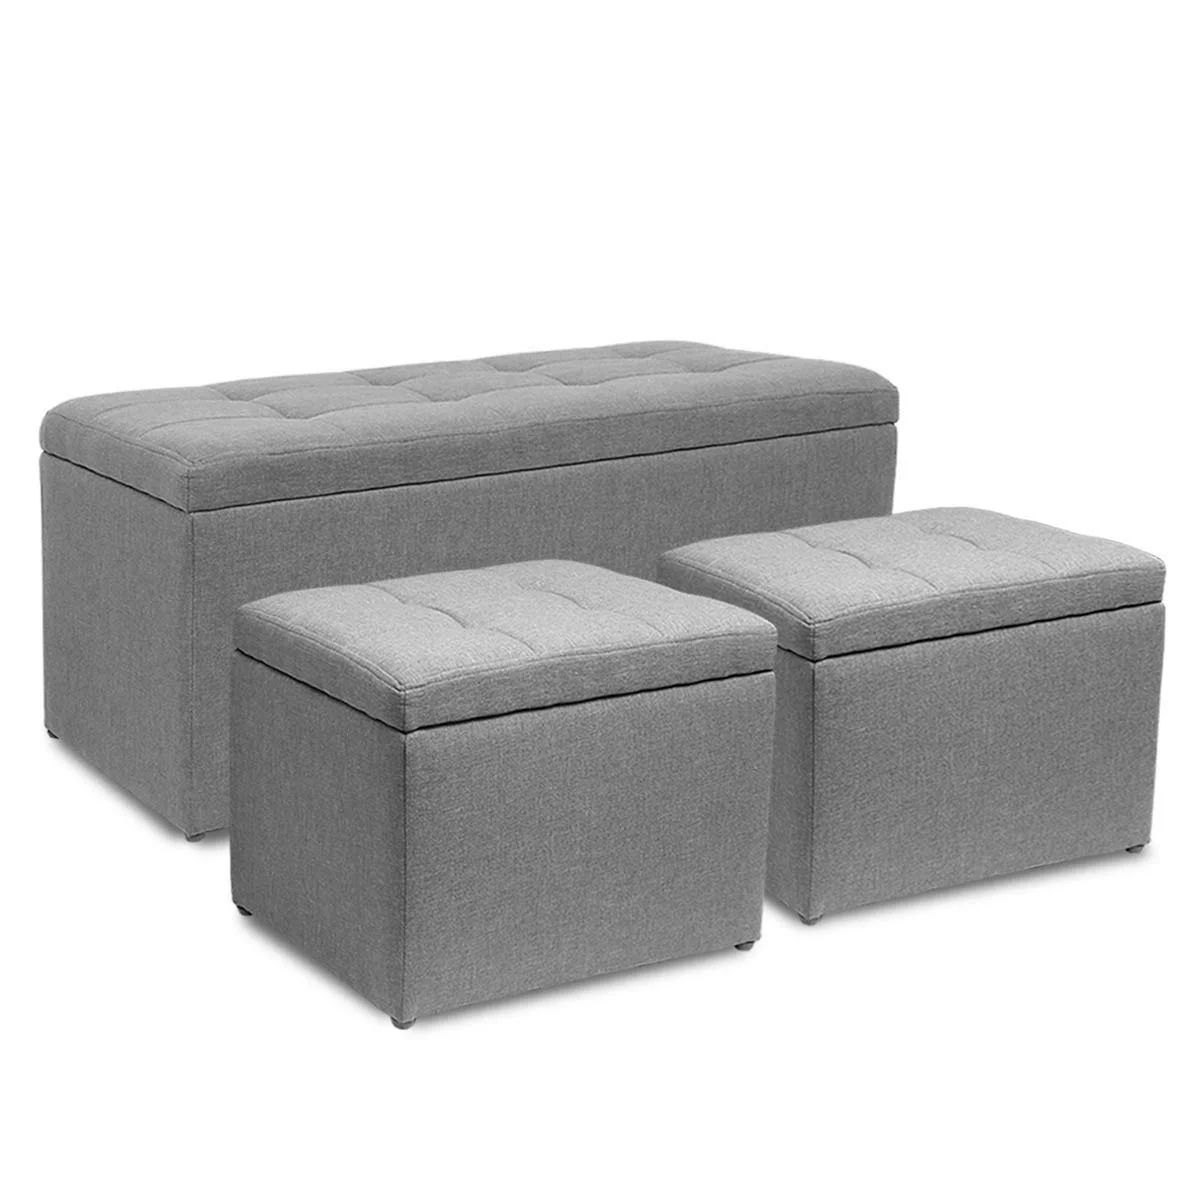 Magshion Rectangular Storage Ottoman Bench Tufted Footrest With Cube Inside Bronze Steel Tufted Square Ottomans (View 16 of 20)